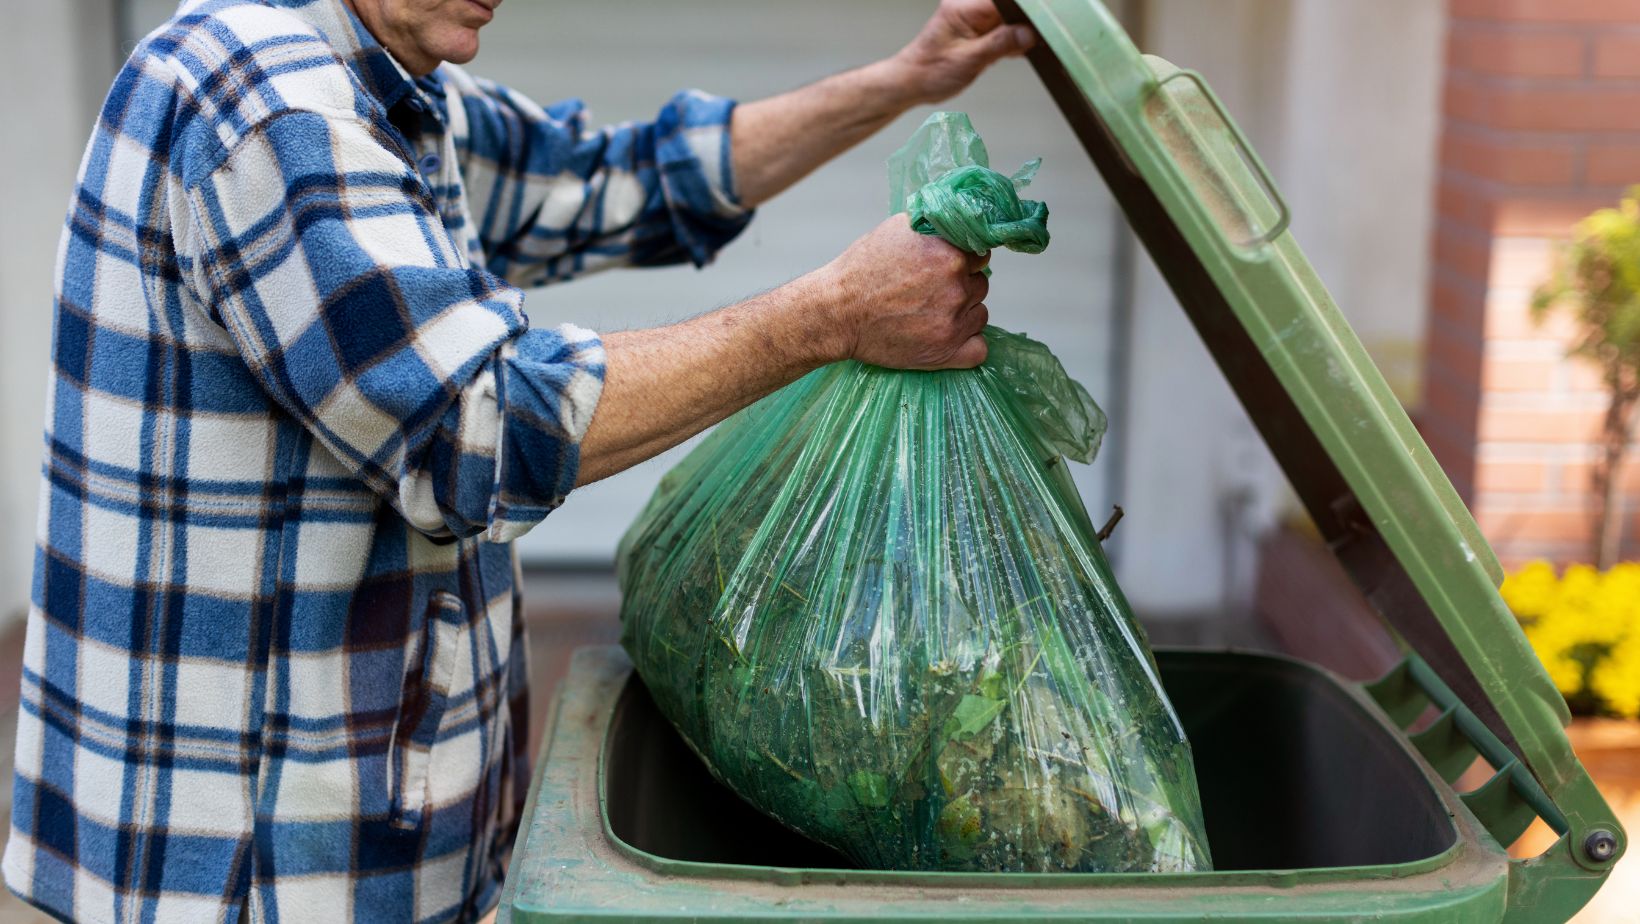 what must food handlers do before taking out the garbage